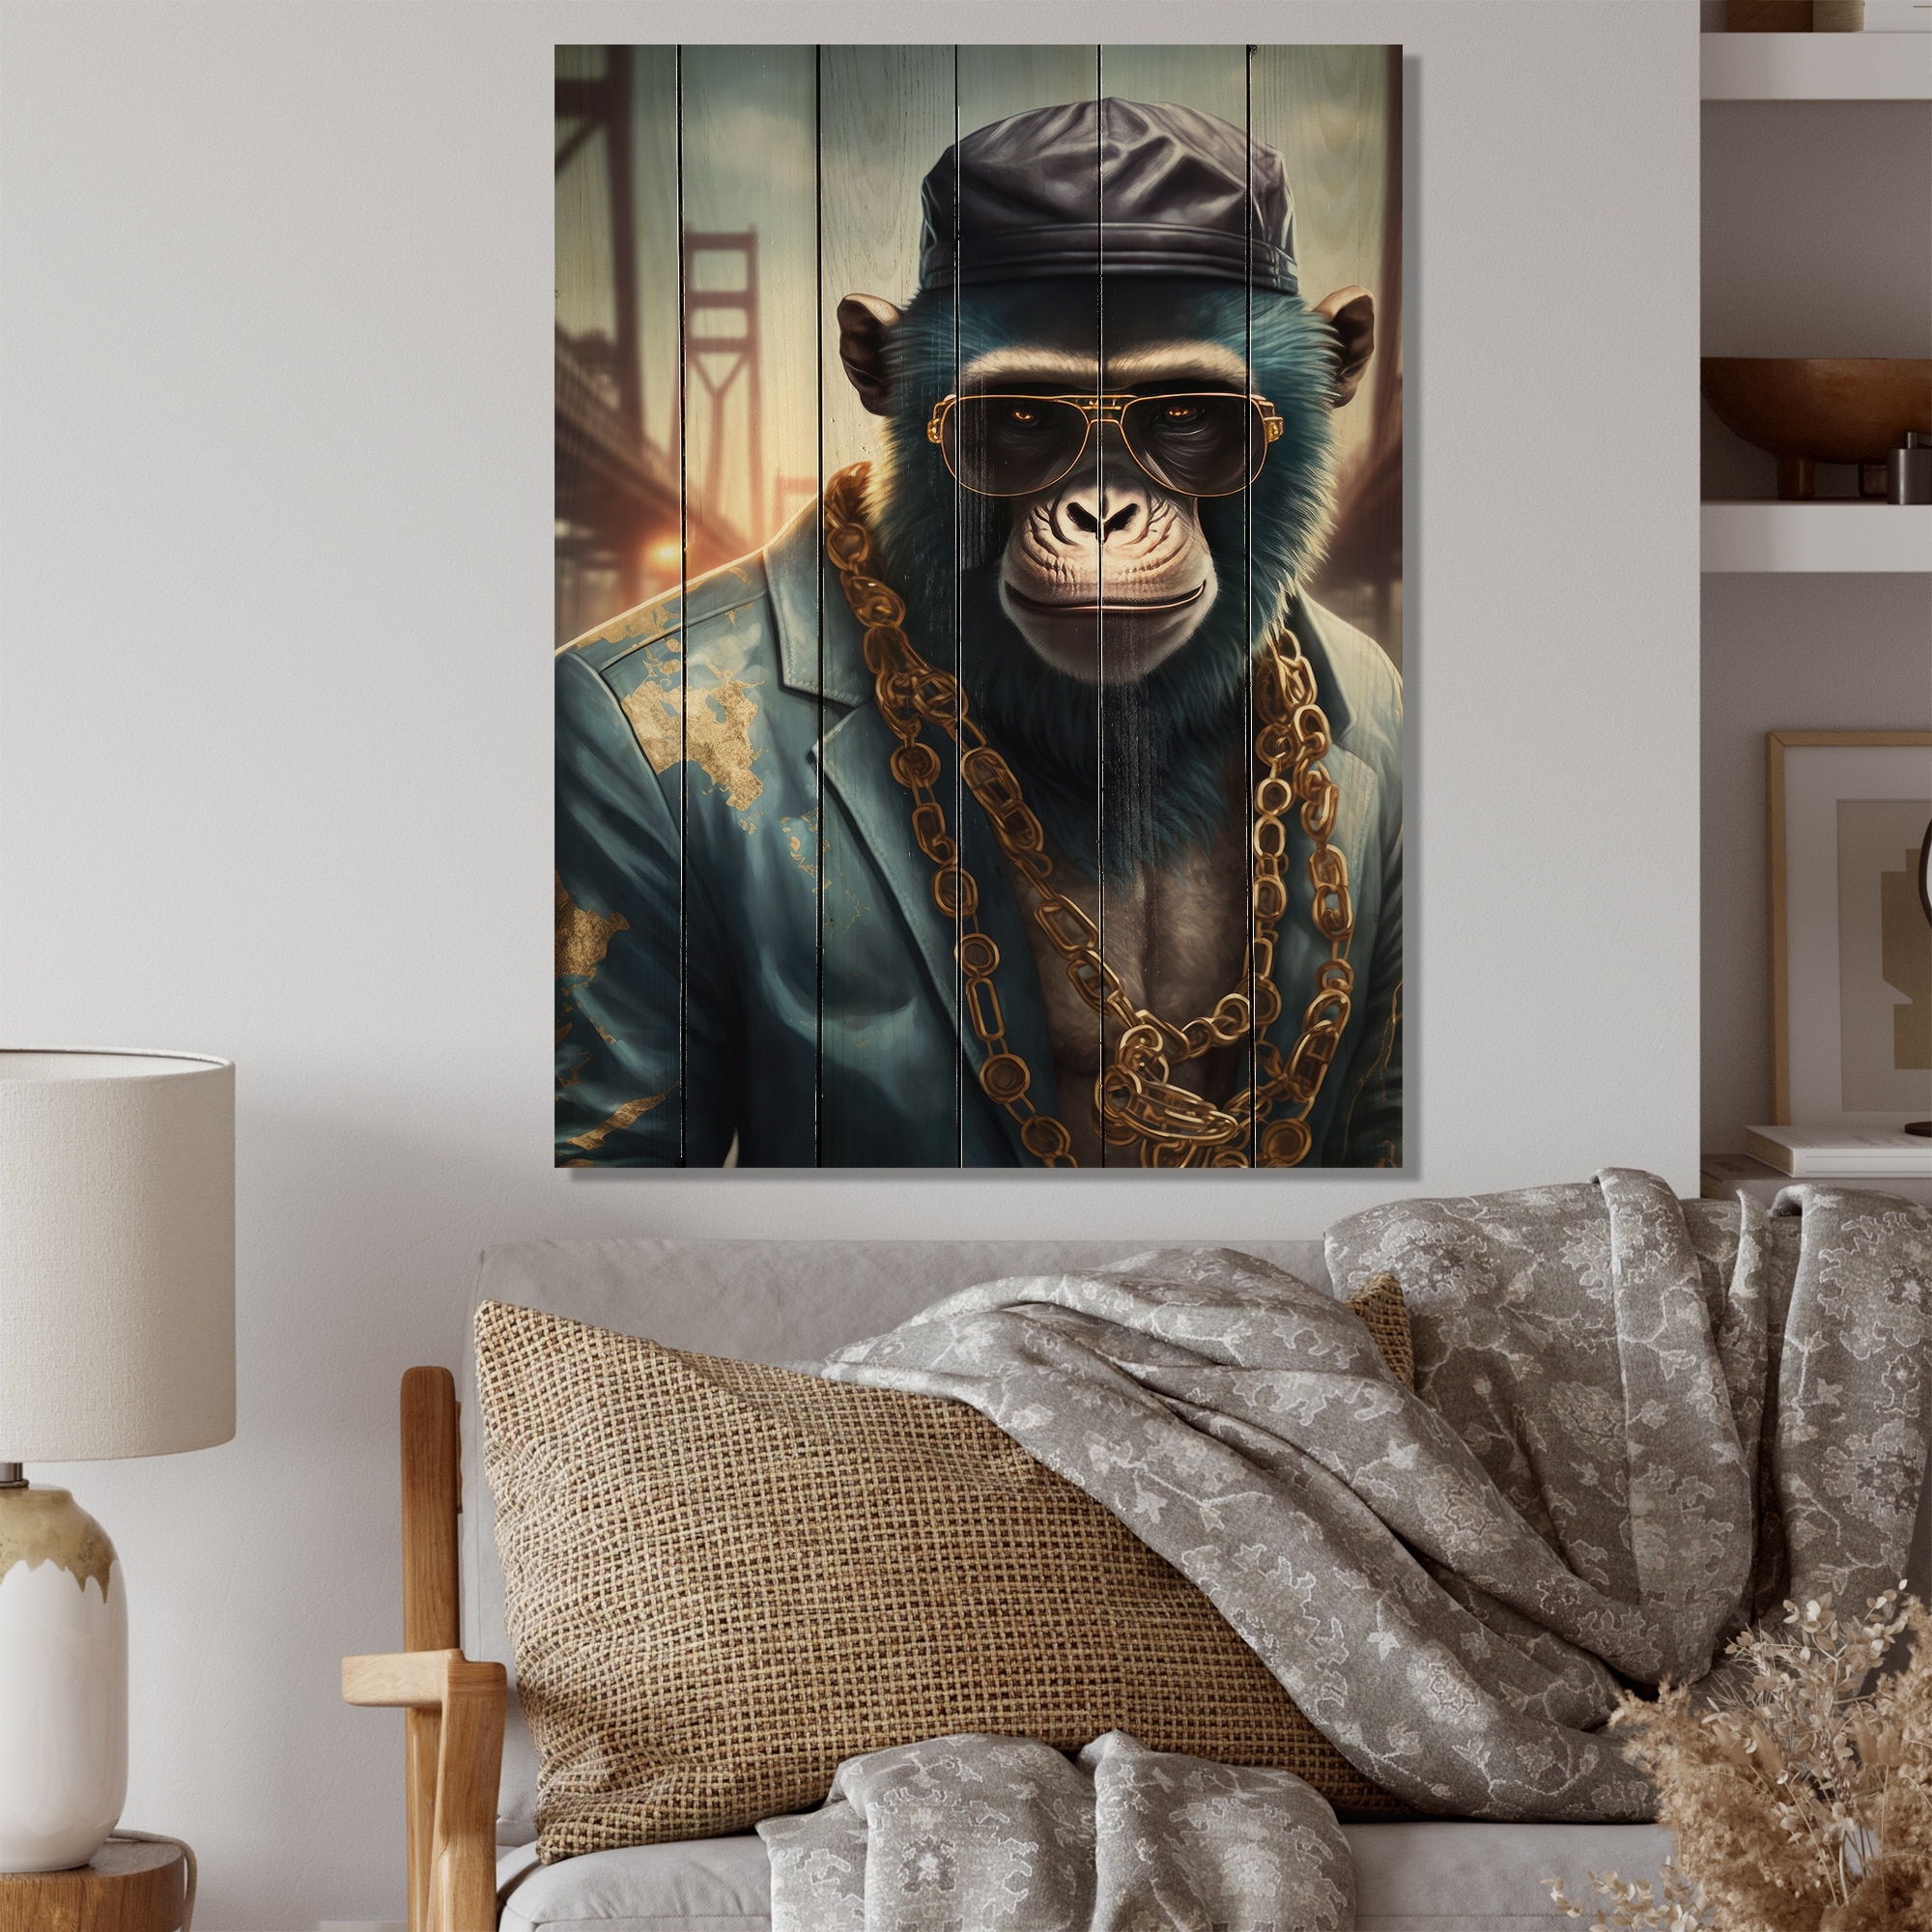 https://ak1.ostkcdn.com/images/products/is/images/direct/b35e87611fc375bcec6a6695e49358b13e5483fb/Designart-%27Monkey-Gangster-In-NYC-IV%27-Animals-Monkey-Wood-Wall-Art---Natural-Pine-Wood.jpg